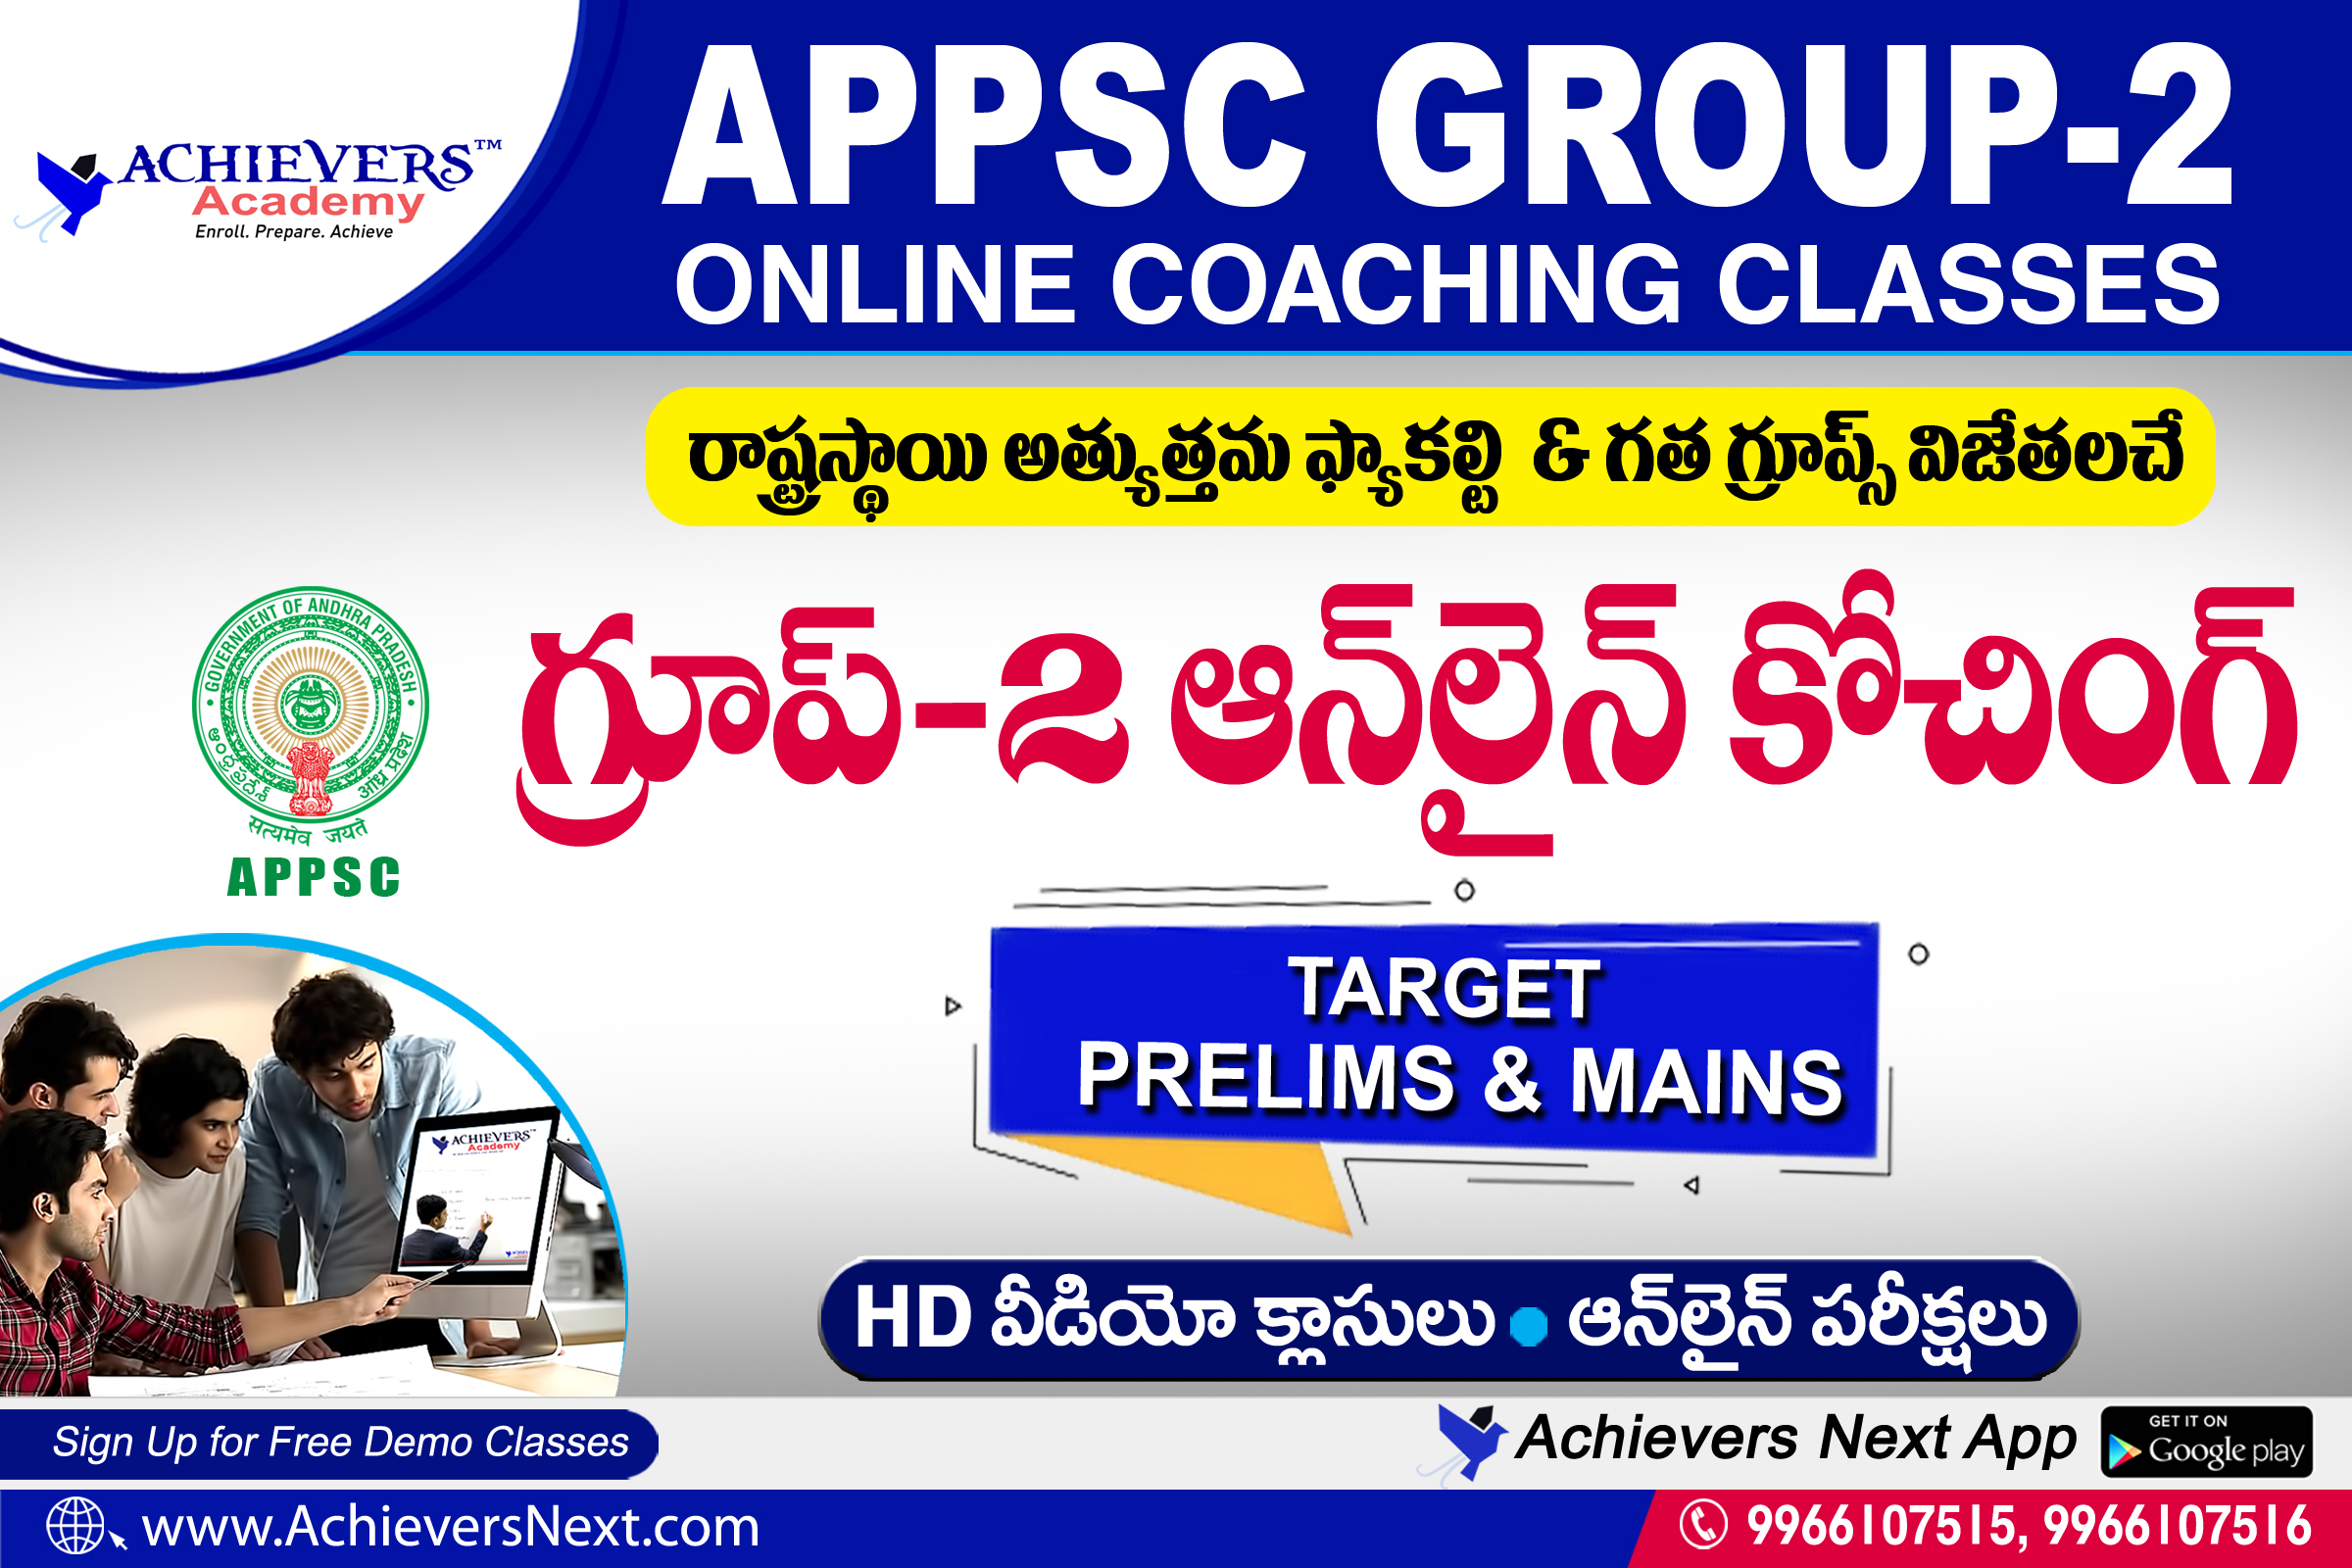 Best Online Coaching for APPSC Group 2 